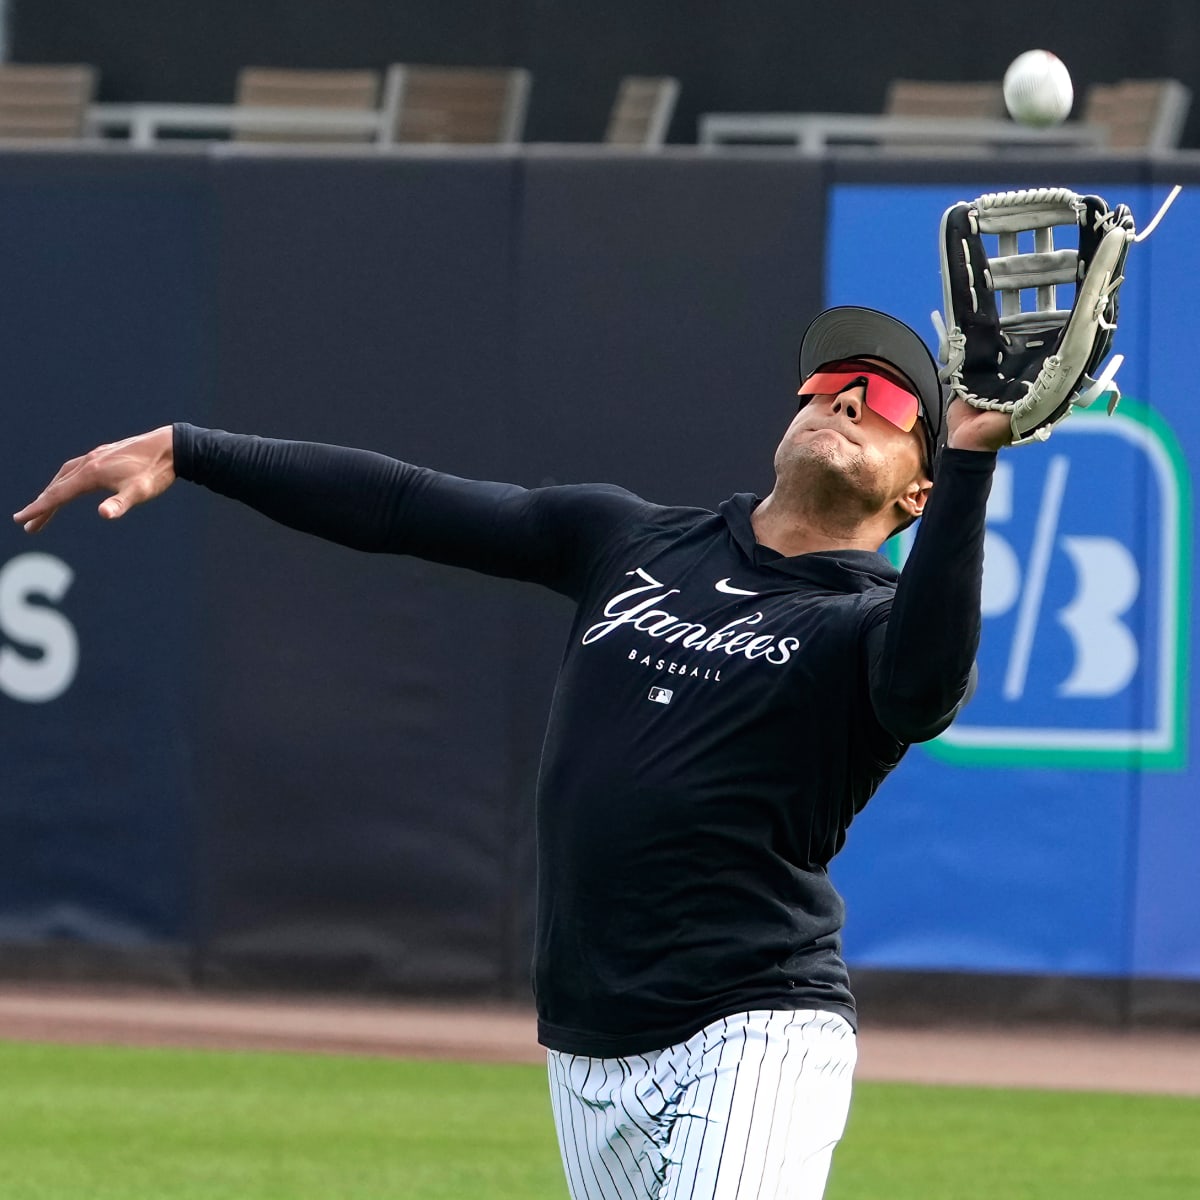 New York Yankees: Roster rankings through early schedule